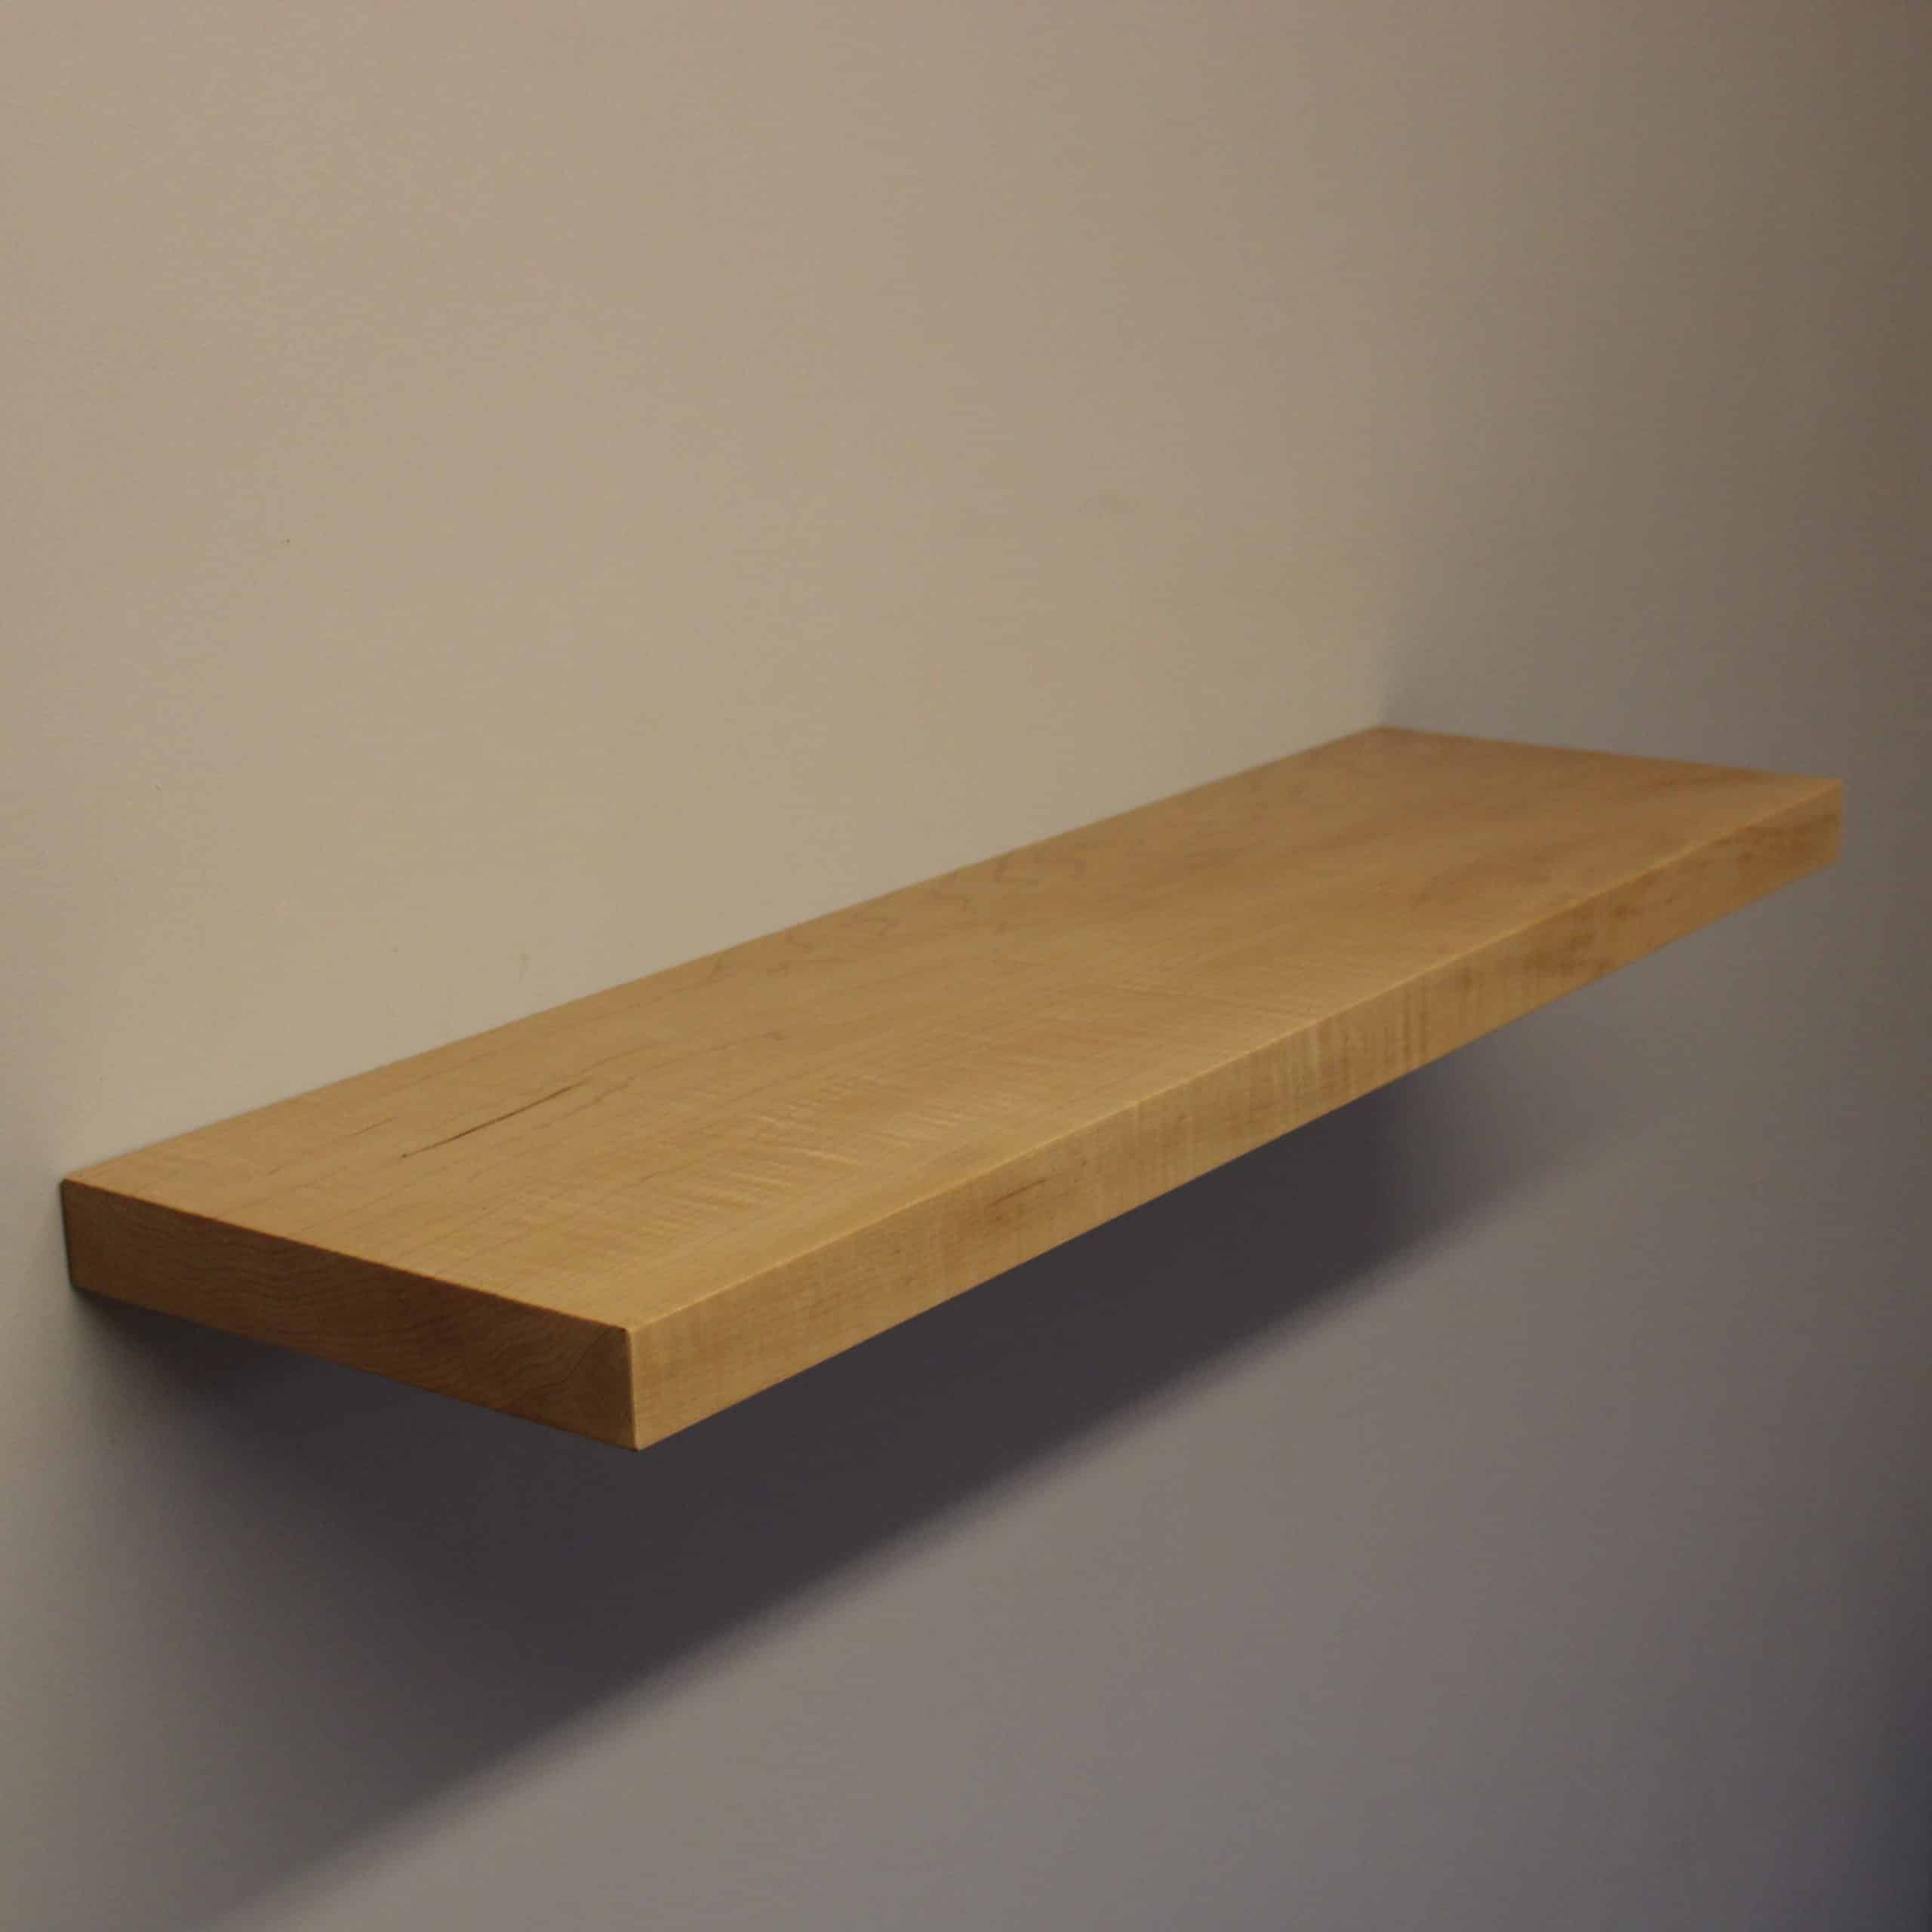 https://www.topshelf.co.uk/wp-content/uploads/2022/08/Solid-Maple-Floating-Shelf-Clear-Satin-Laquered-scaled.jpg